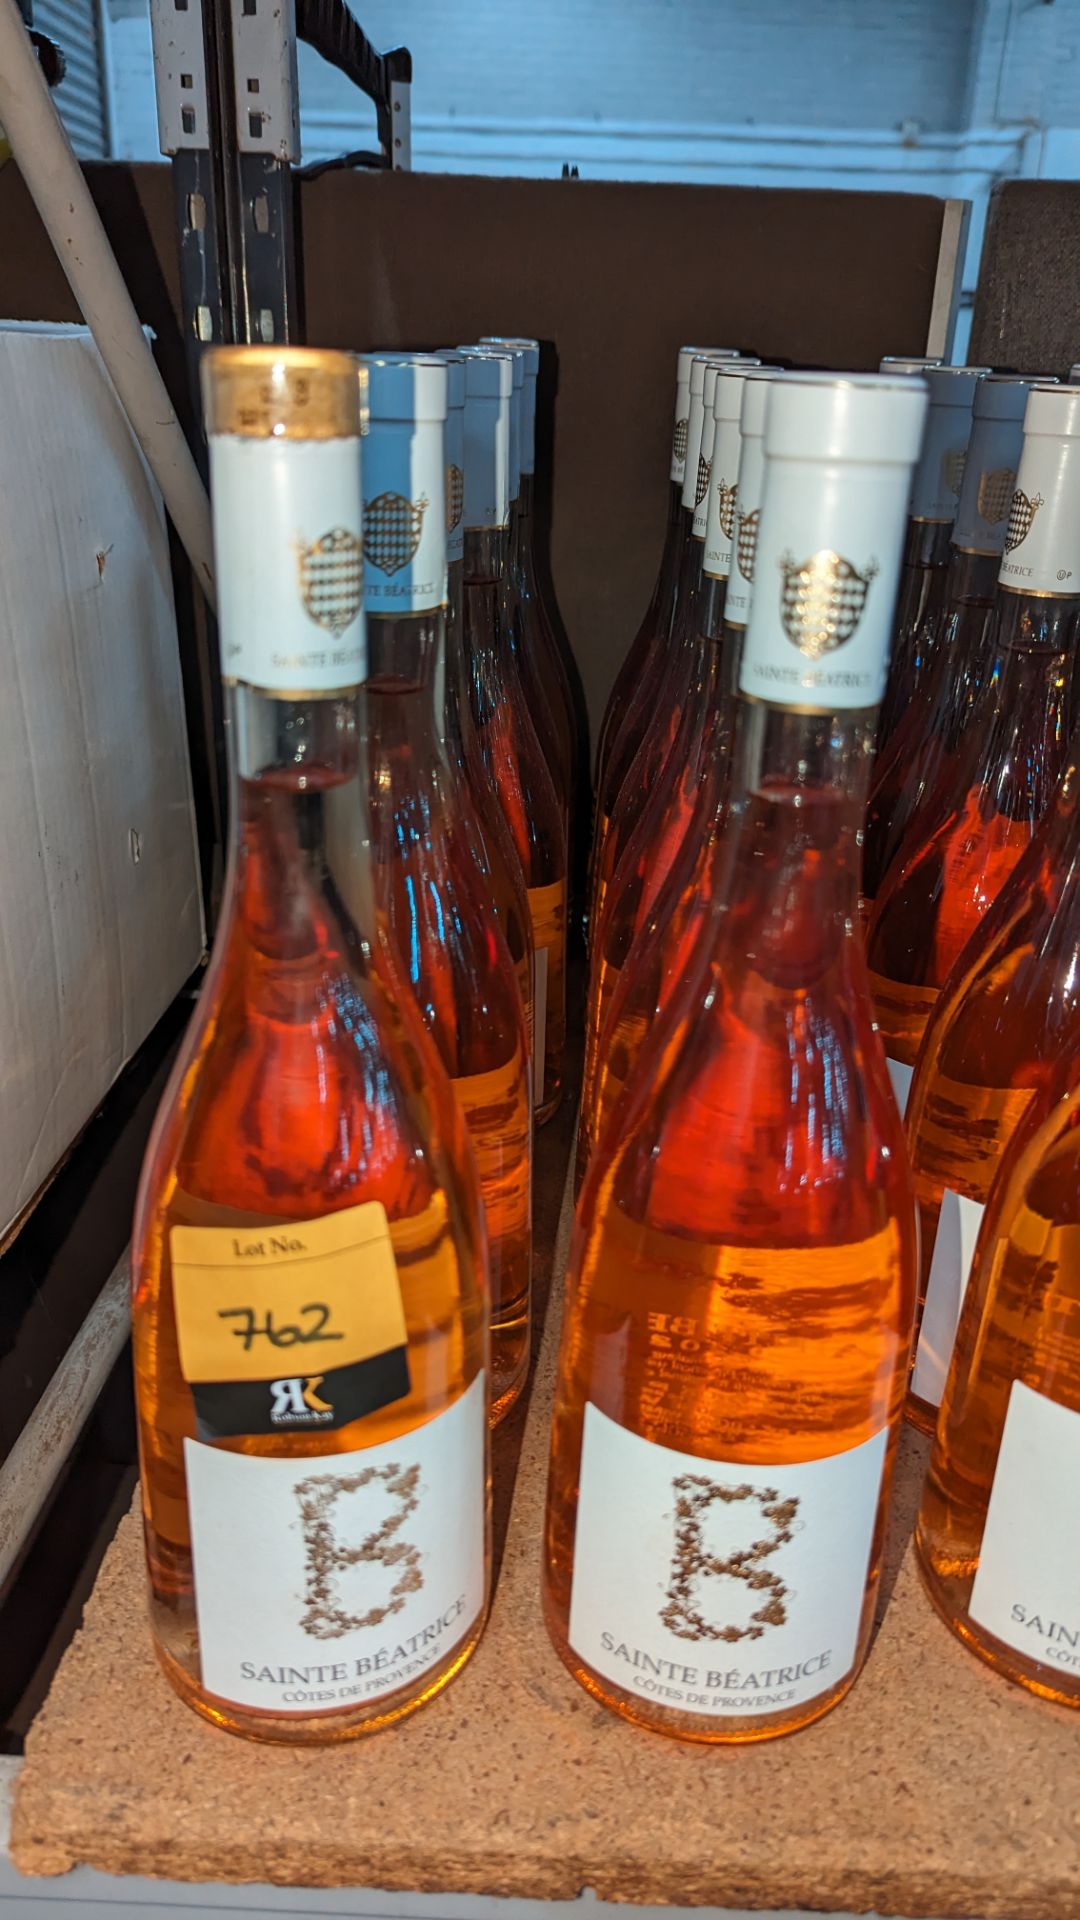 12 bottles of Sainte Béatrice Côtes de Provence 2020 rosé French wine sold under AWRS number XQAW000